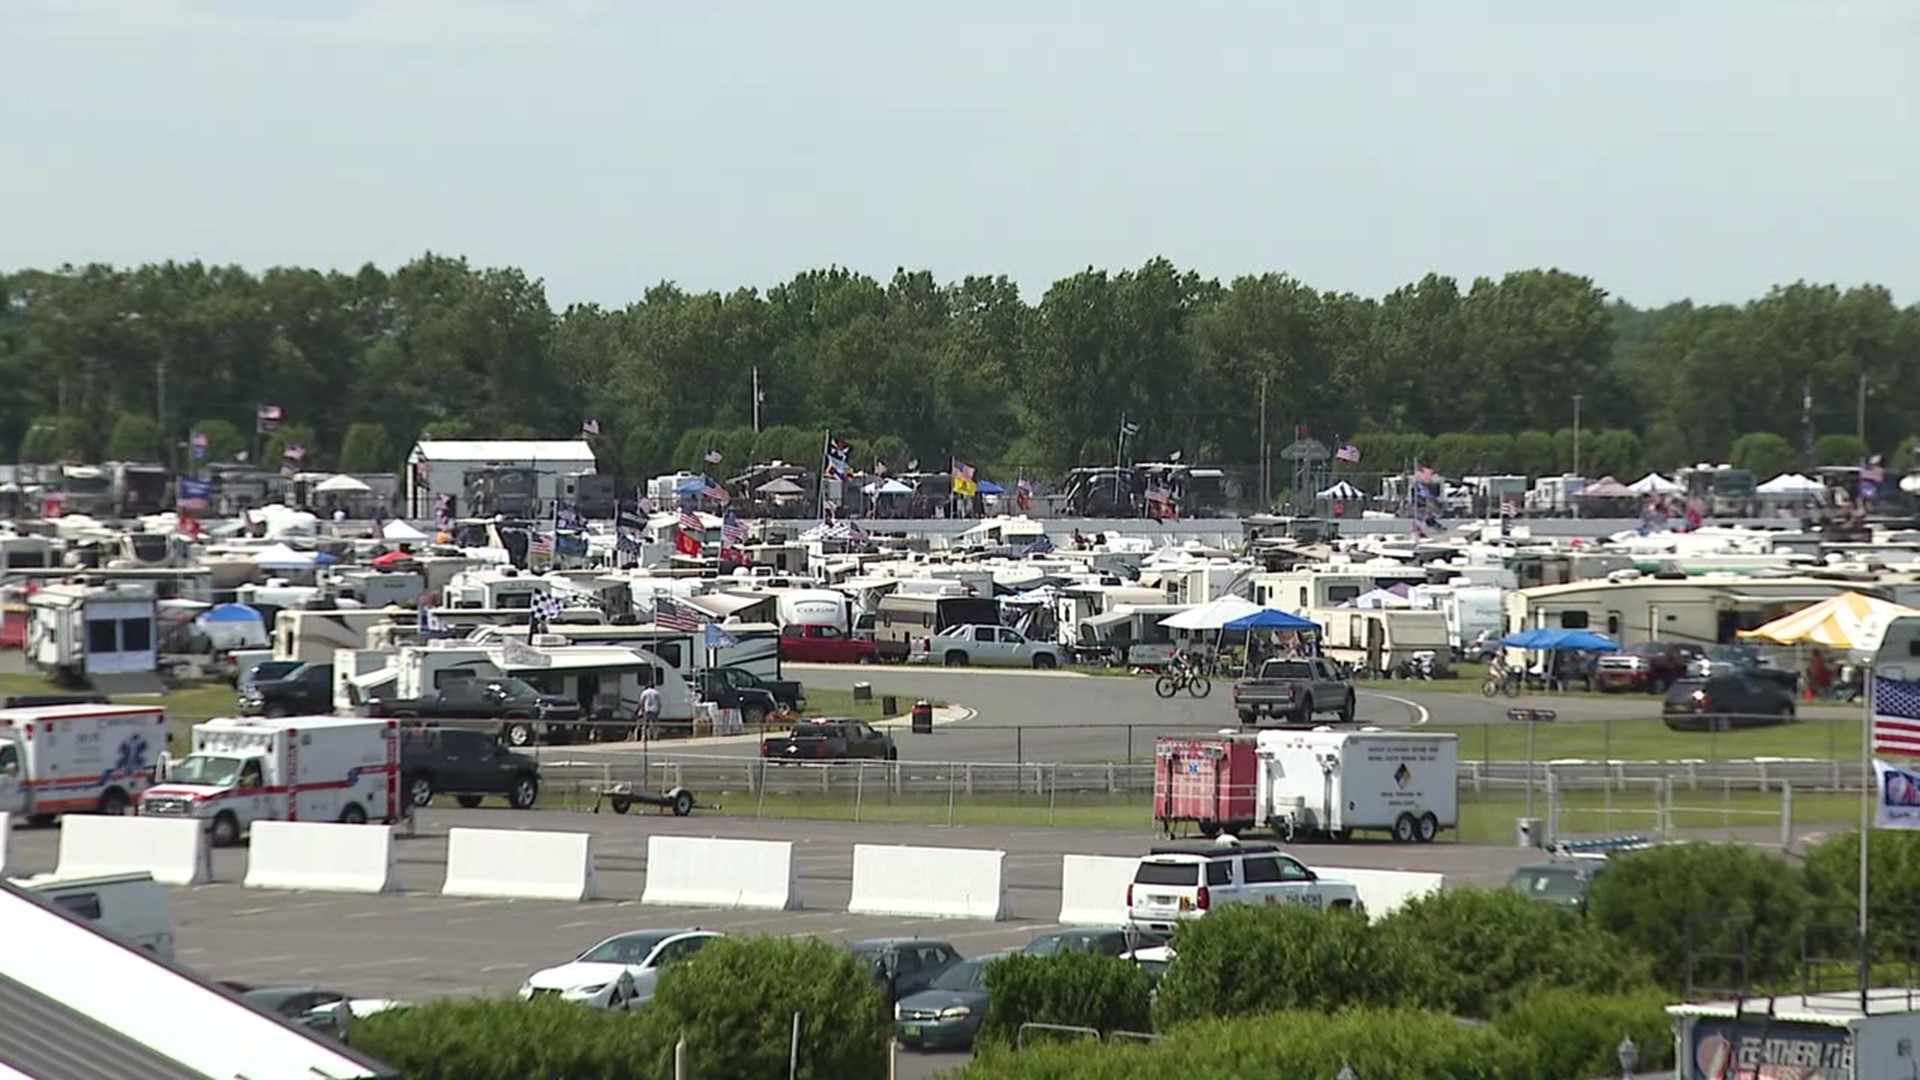 This is the largest crowd in recent history at Pocono Raceway, and officials remind people to be patient.